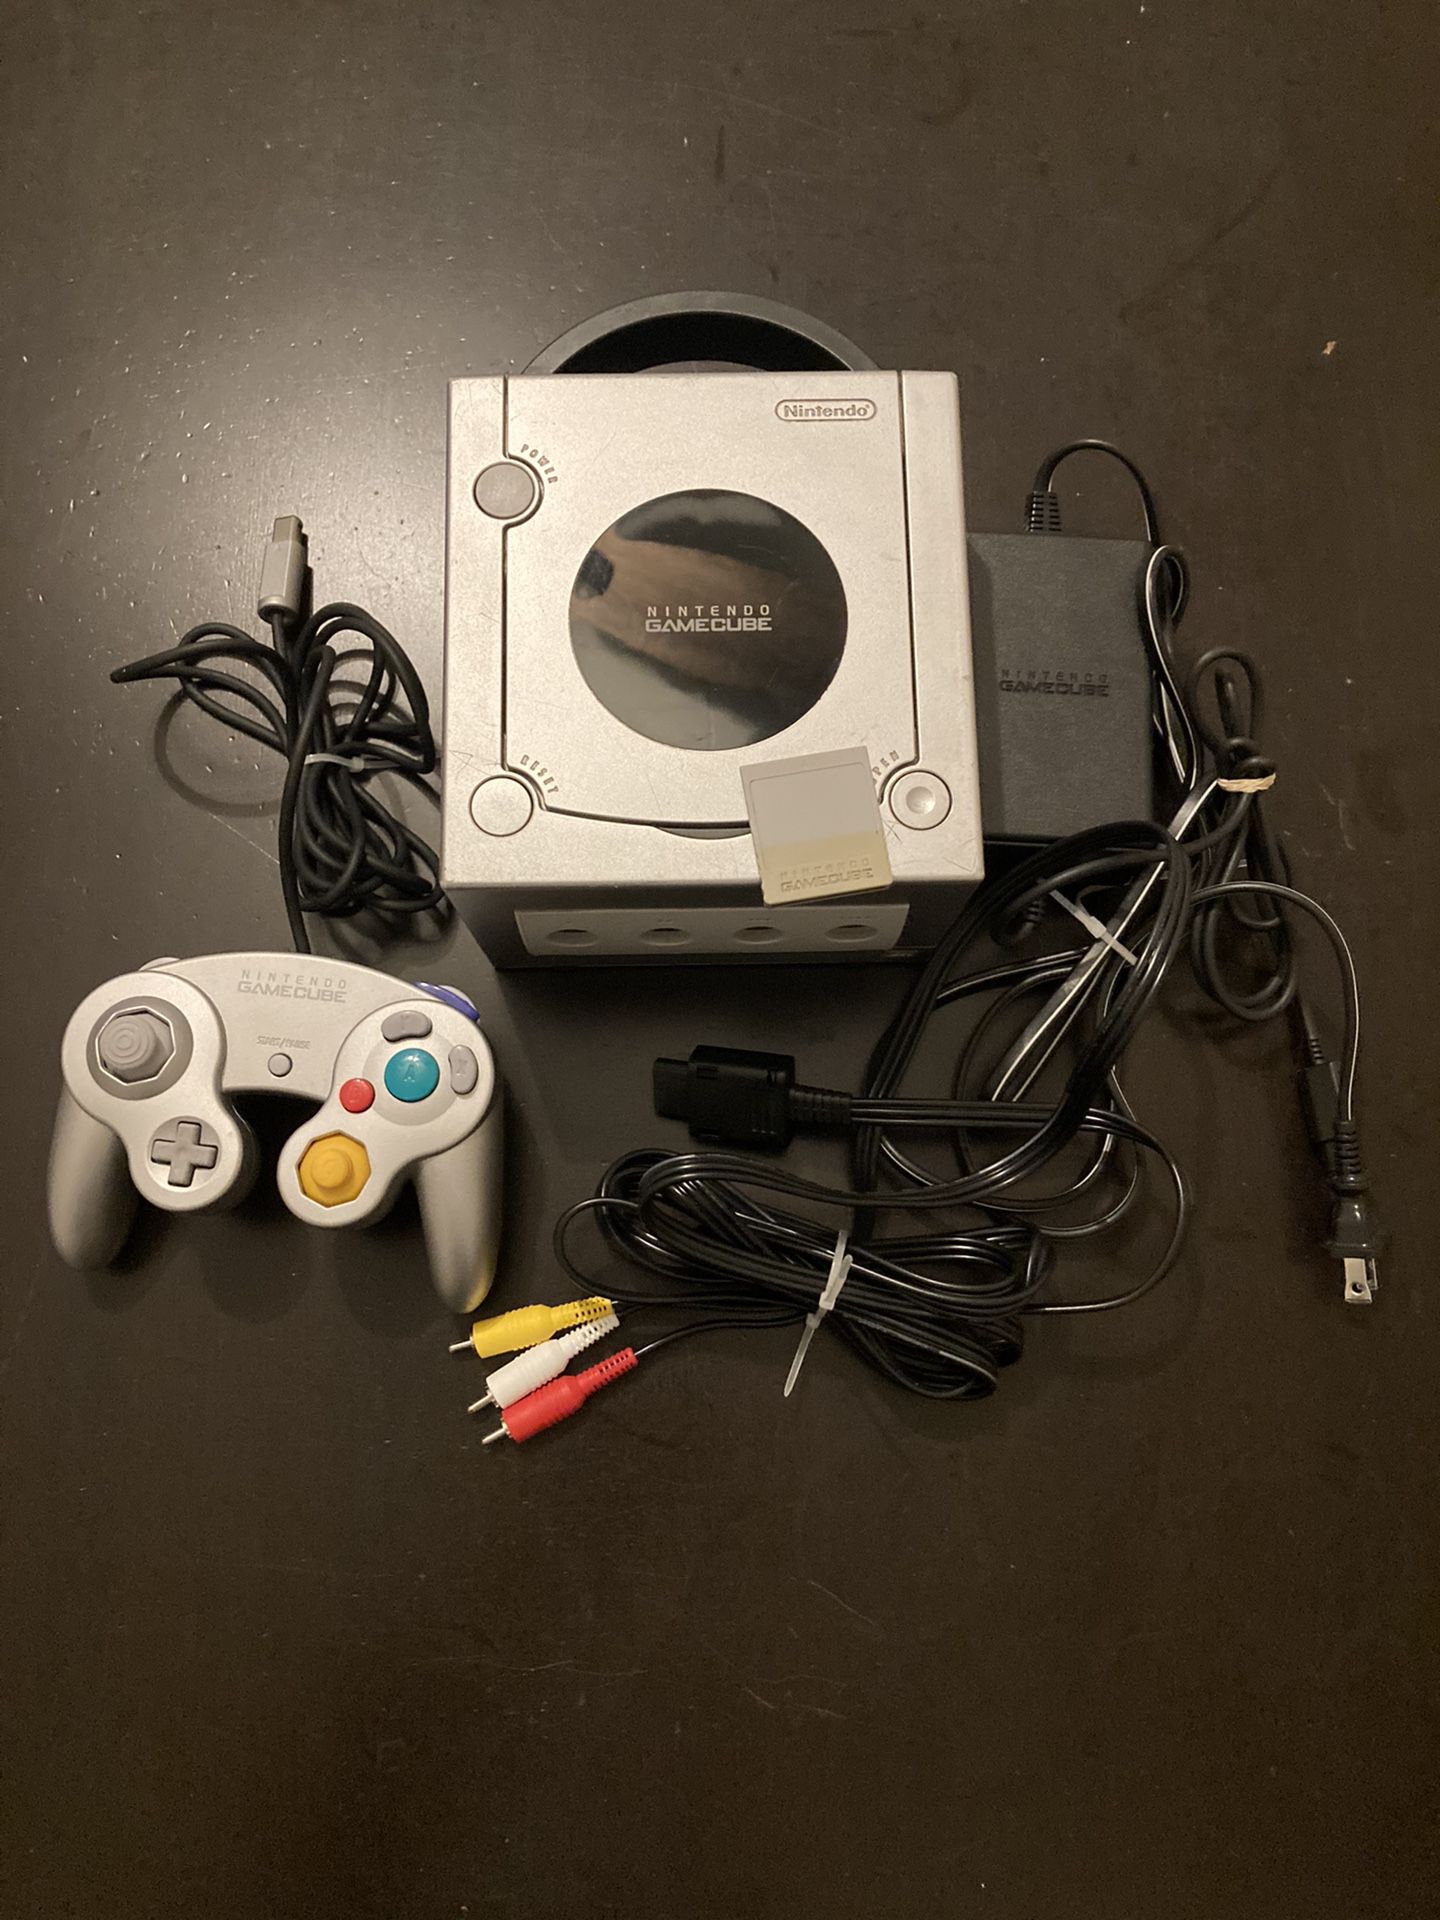 Nintendo GameCube Complete with Memory Card and Mario Party 6 